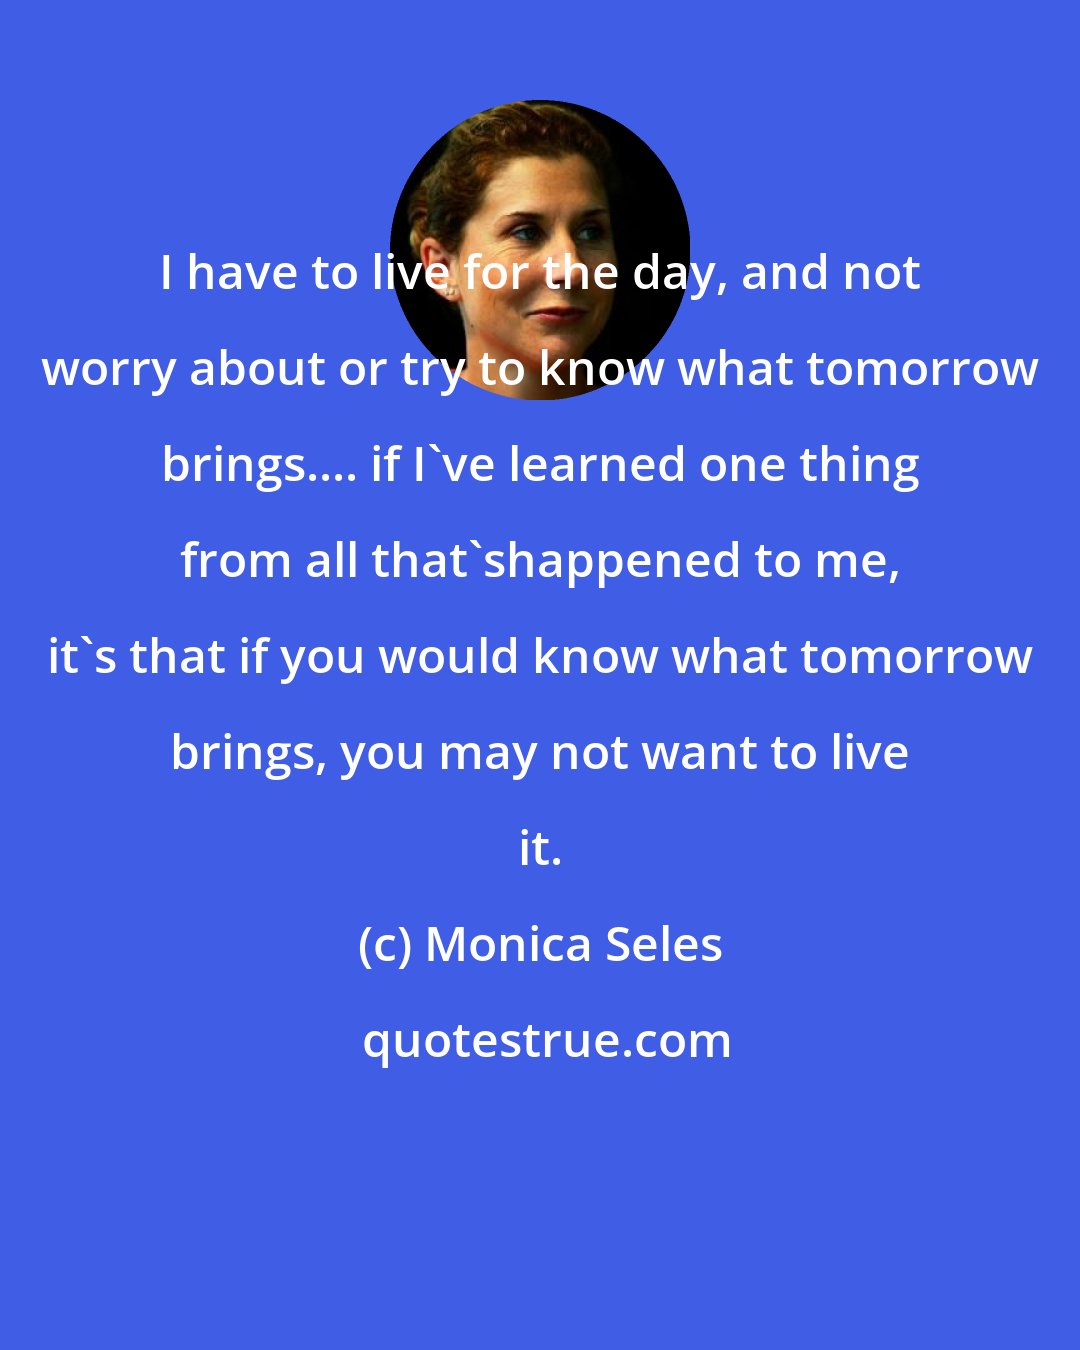 Monica Seles: I have to live for the day, and not worry about or try to know what tomorrow brings.... if I've learned one thing from all that'shappened to me, it's that if you would know what tomorrow brings, you may not want to live it.